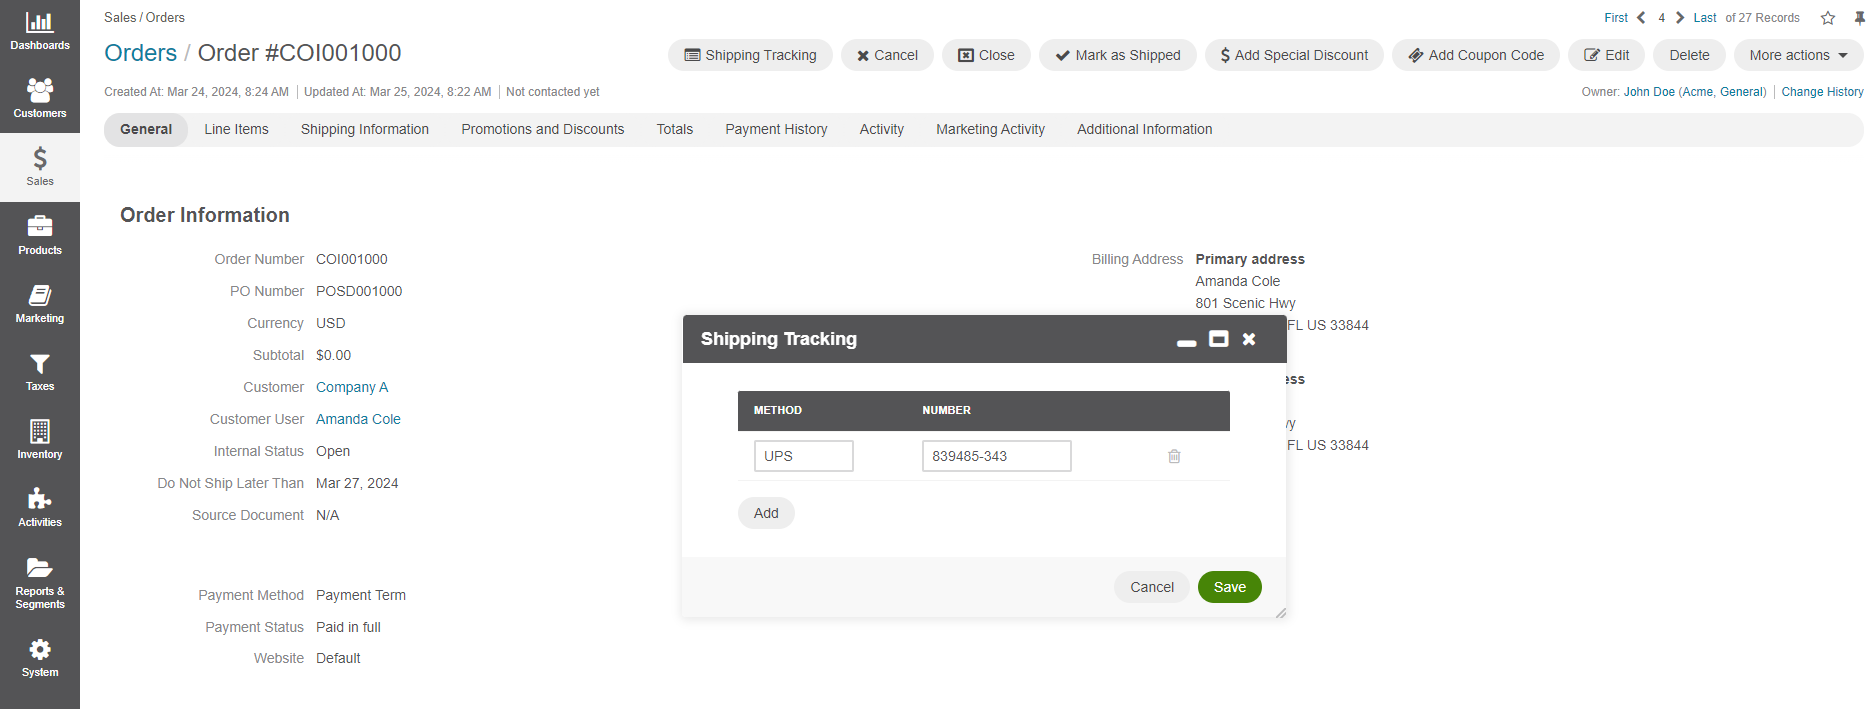 Enter the UPS tracking number